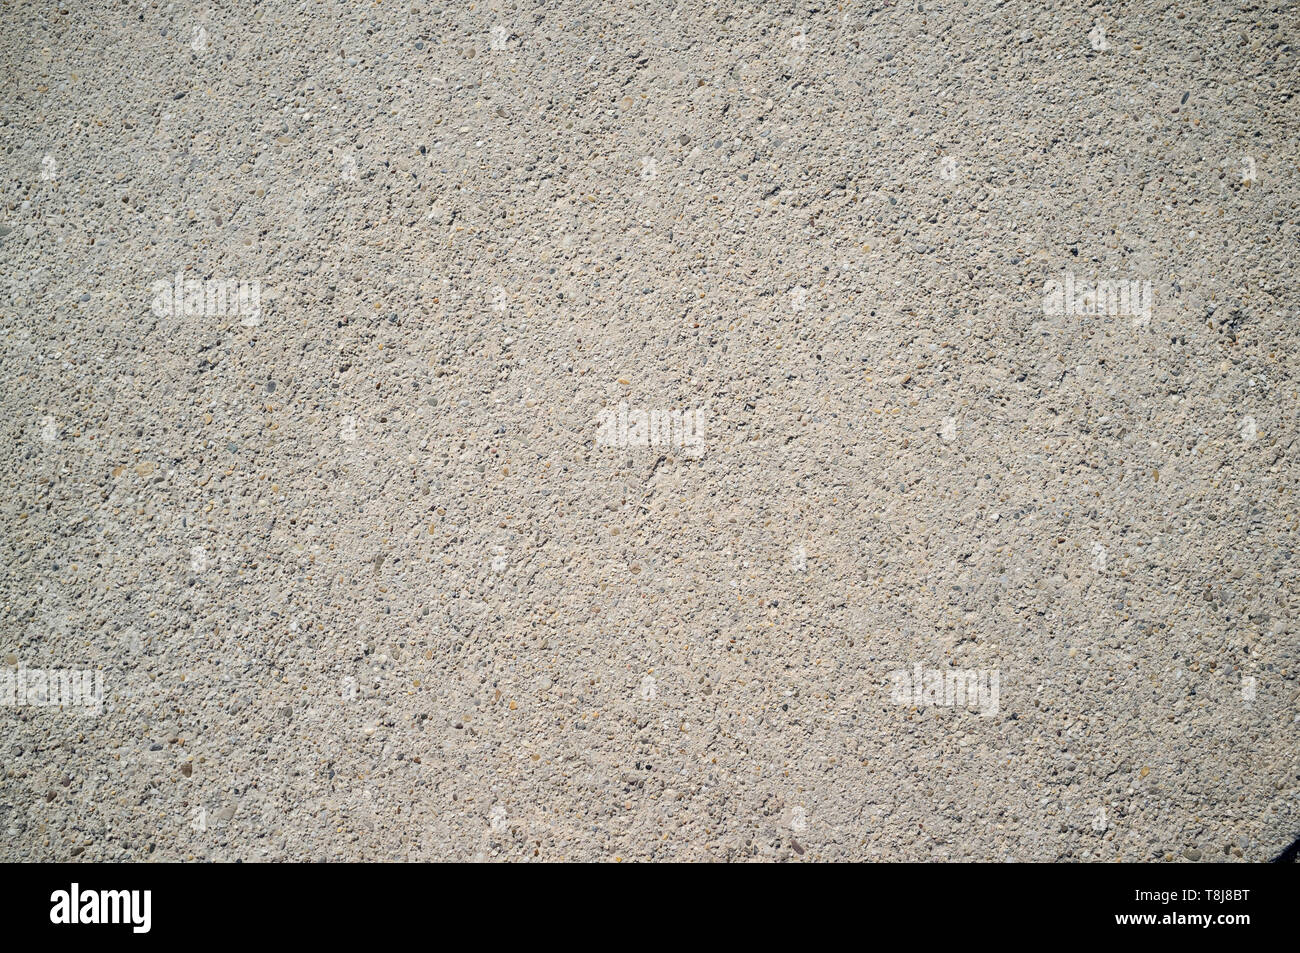 Texture of Old Weathered Concrete Wall with Small Rocks on Direct Sunlight Stock Photo